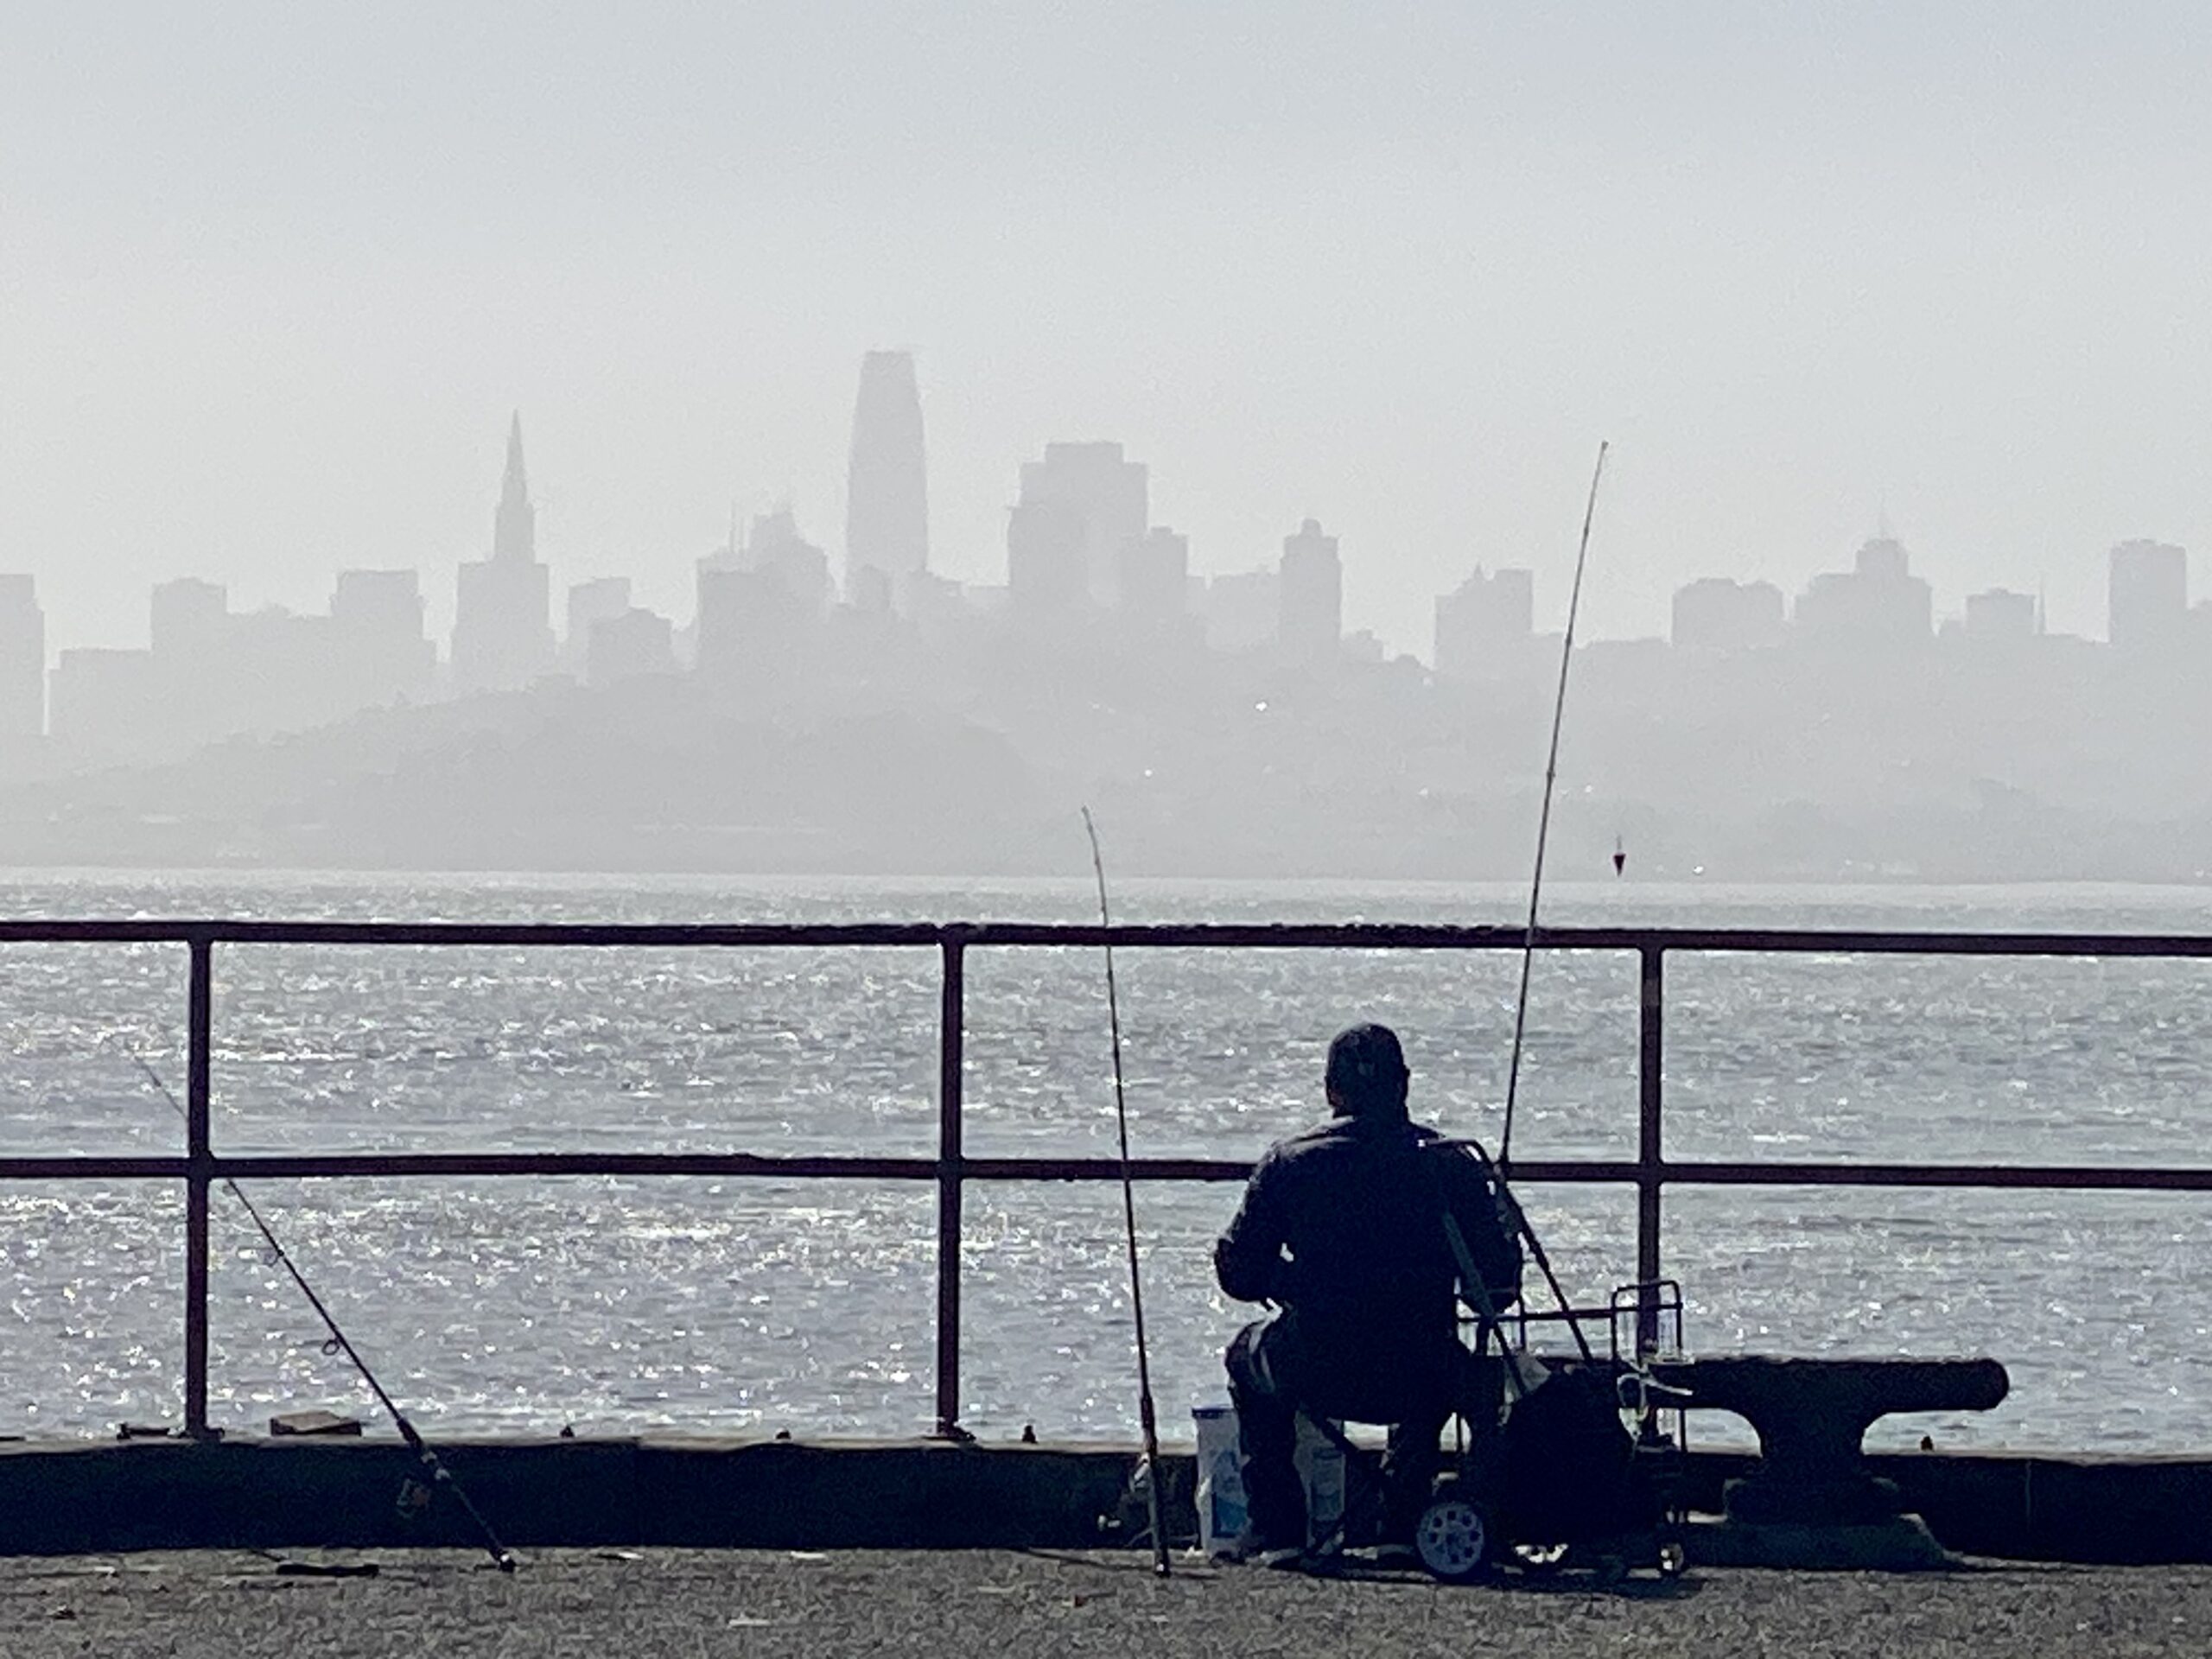 Why is it so hazy in San Francisco today?